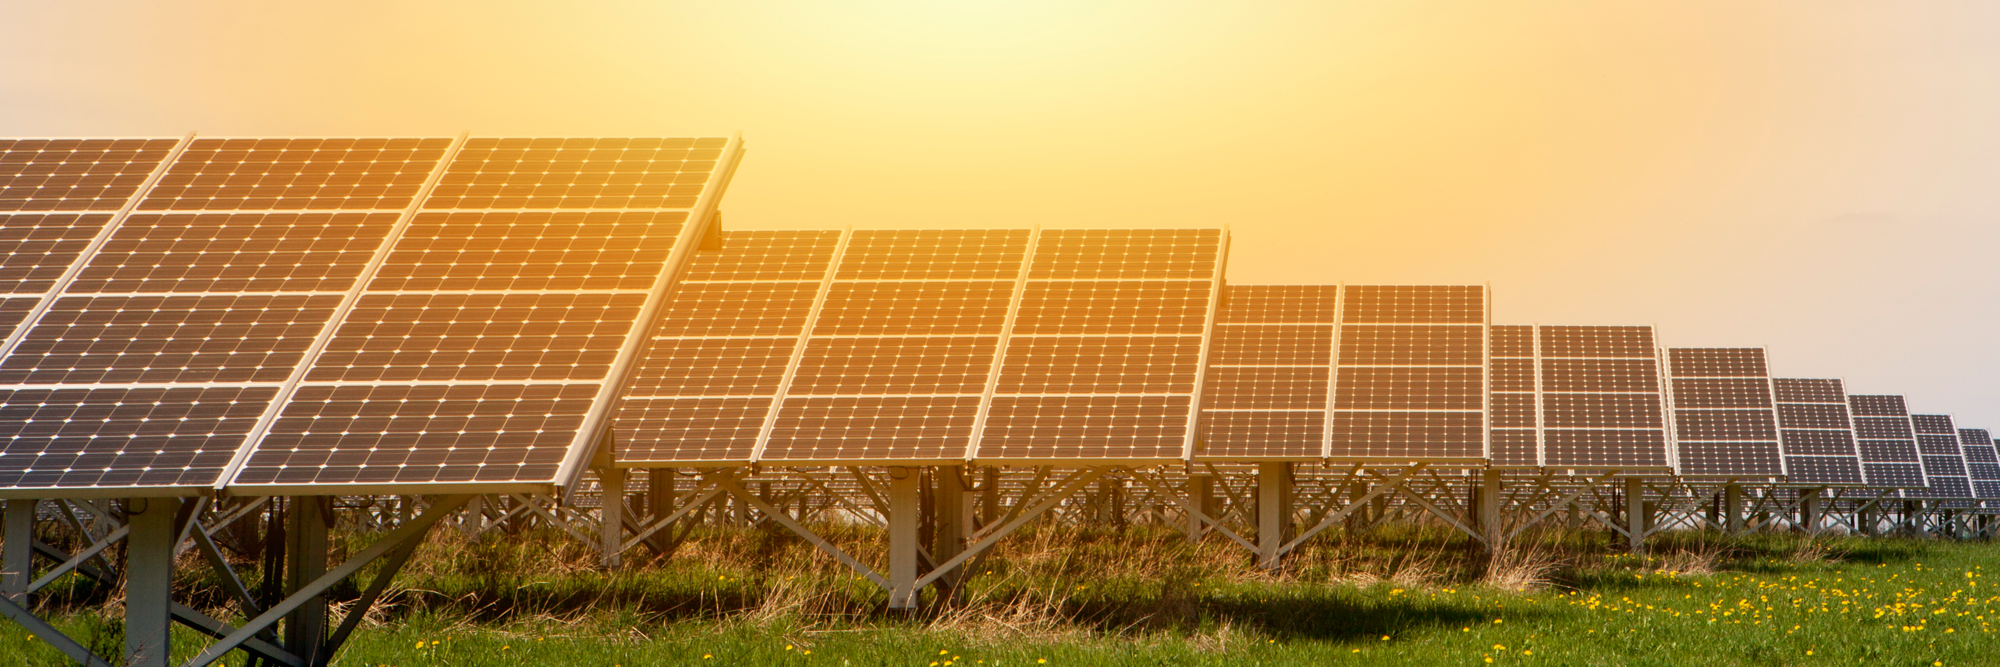 A field of solar panels with a setting sun in the background - Investor Information